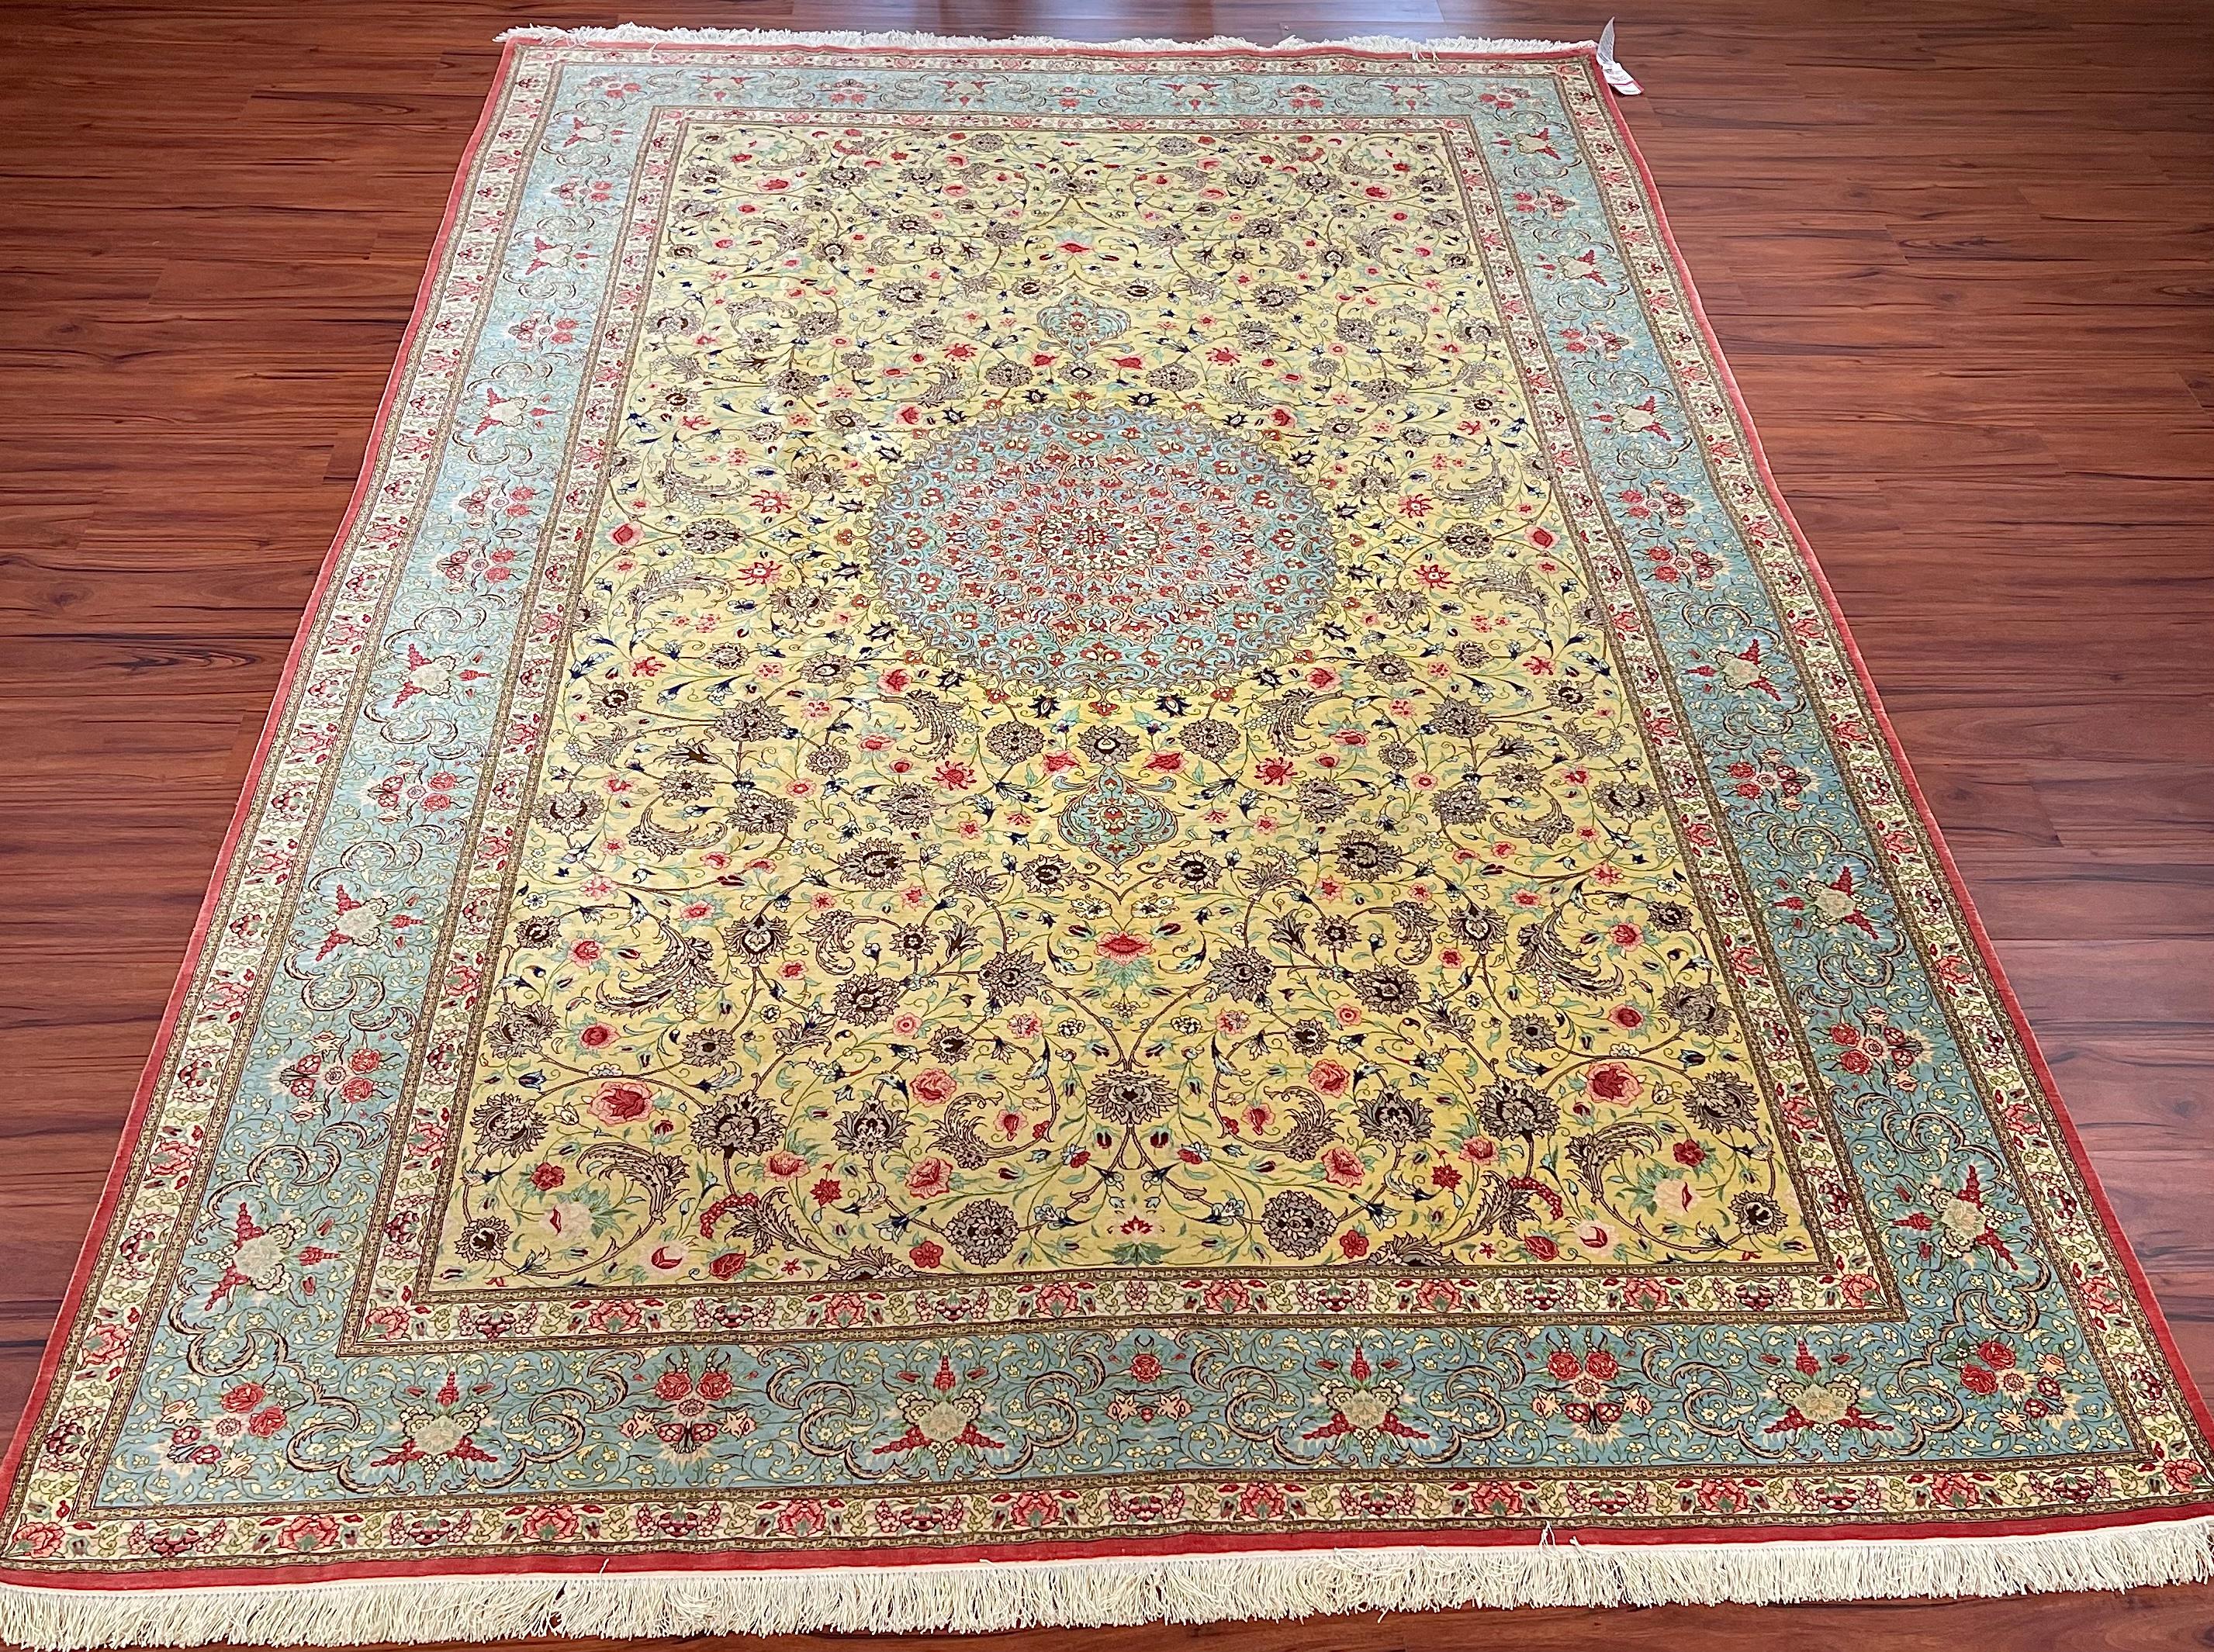 A stunning 100% silk Persian Qum rug. Originated from Iran in the time period of the 1980’s. This Rug is in excellent condition and Measures in at 6ft 6in/ 10ft long.